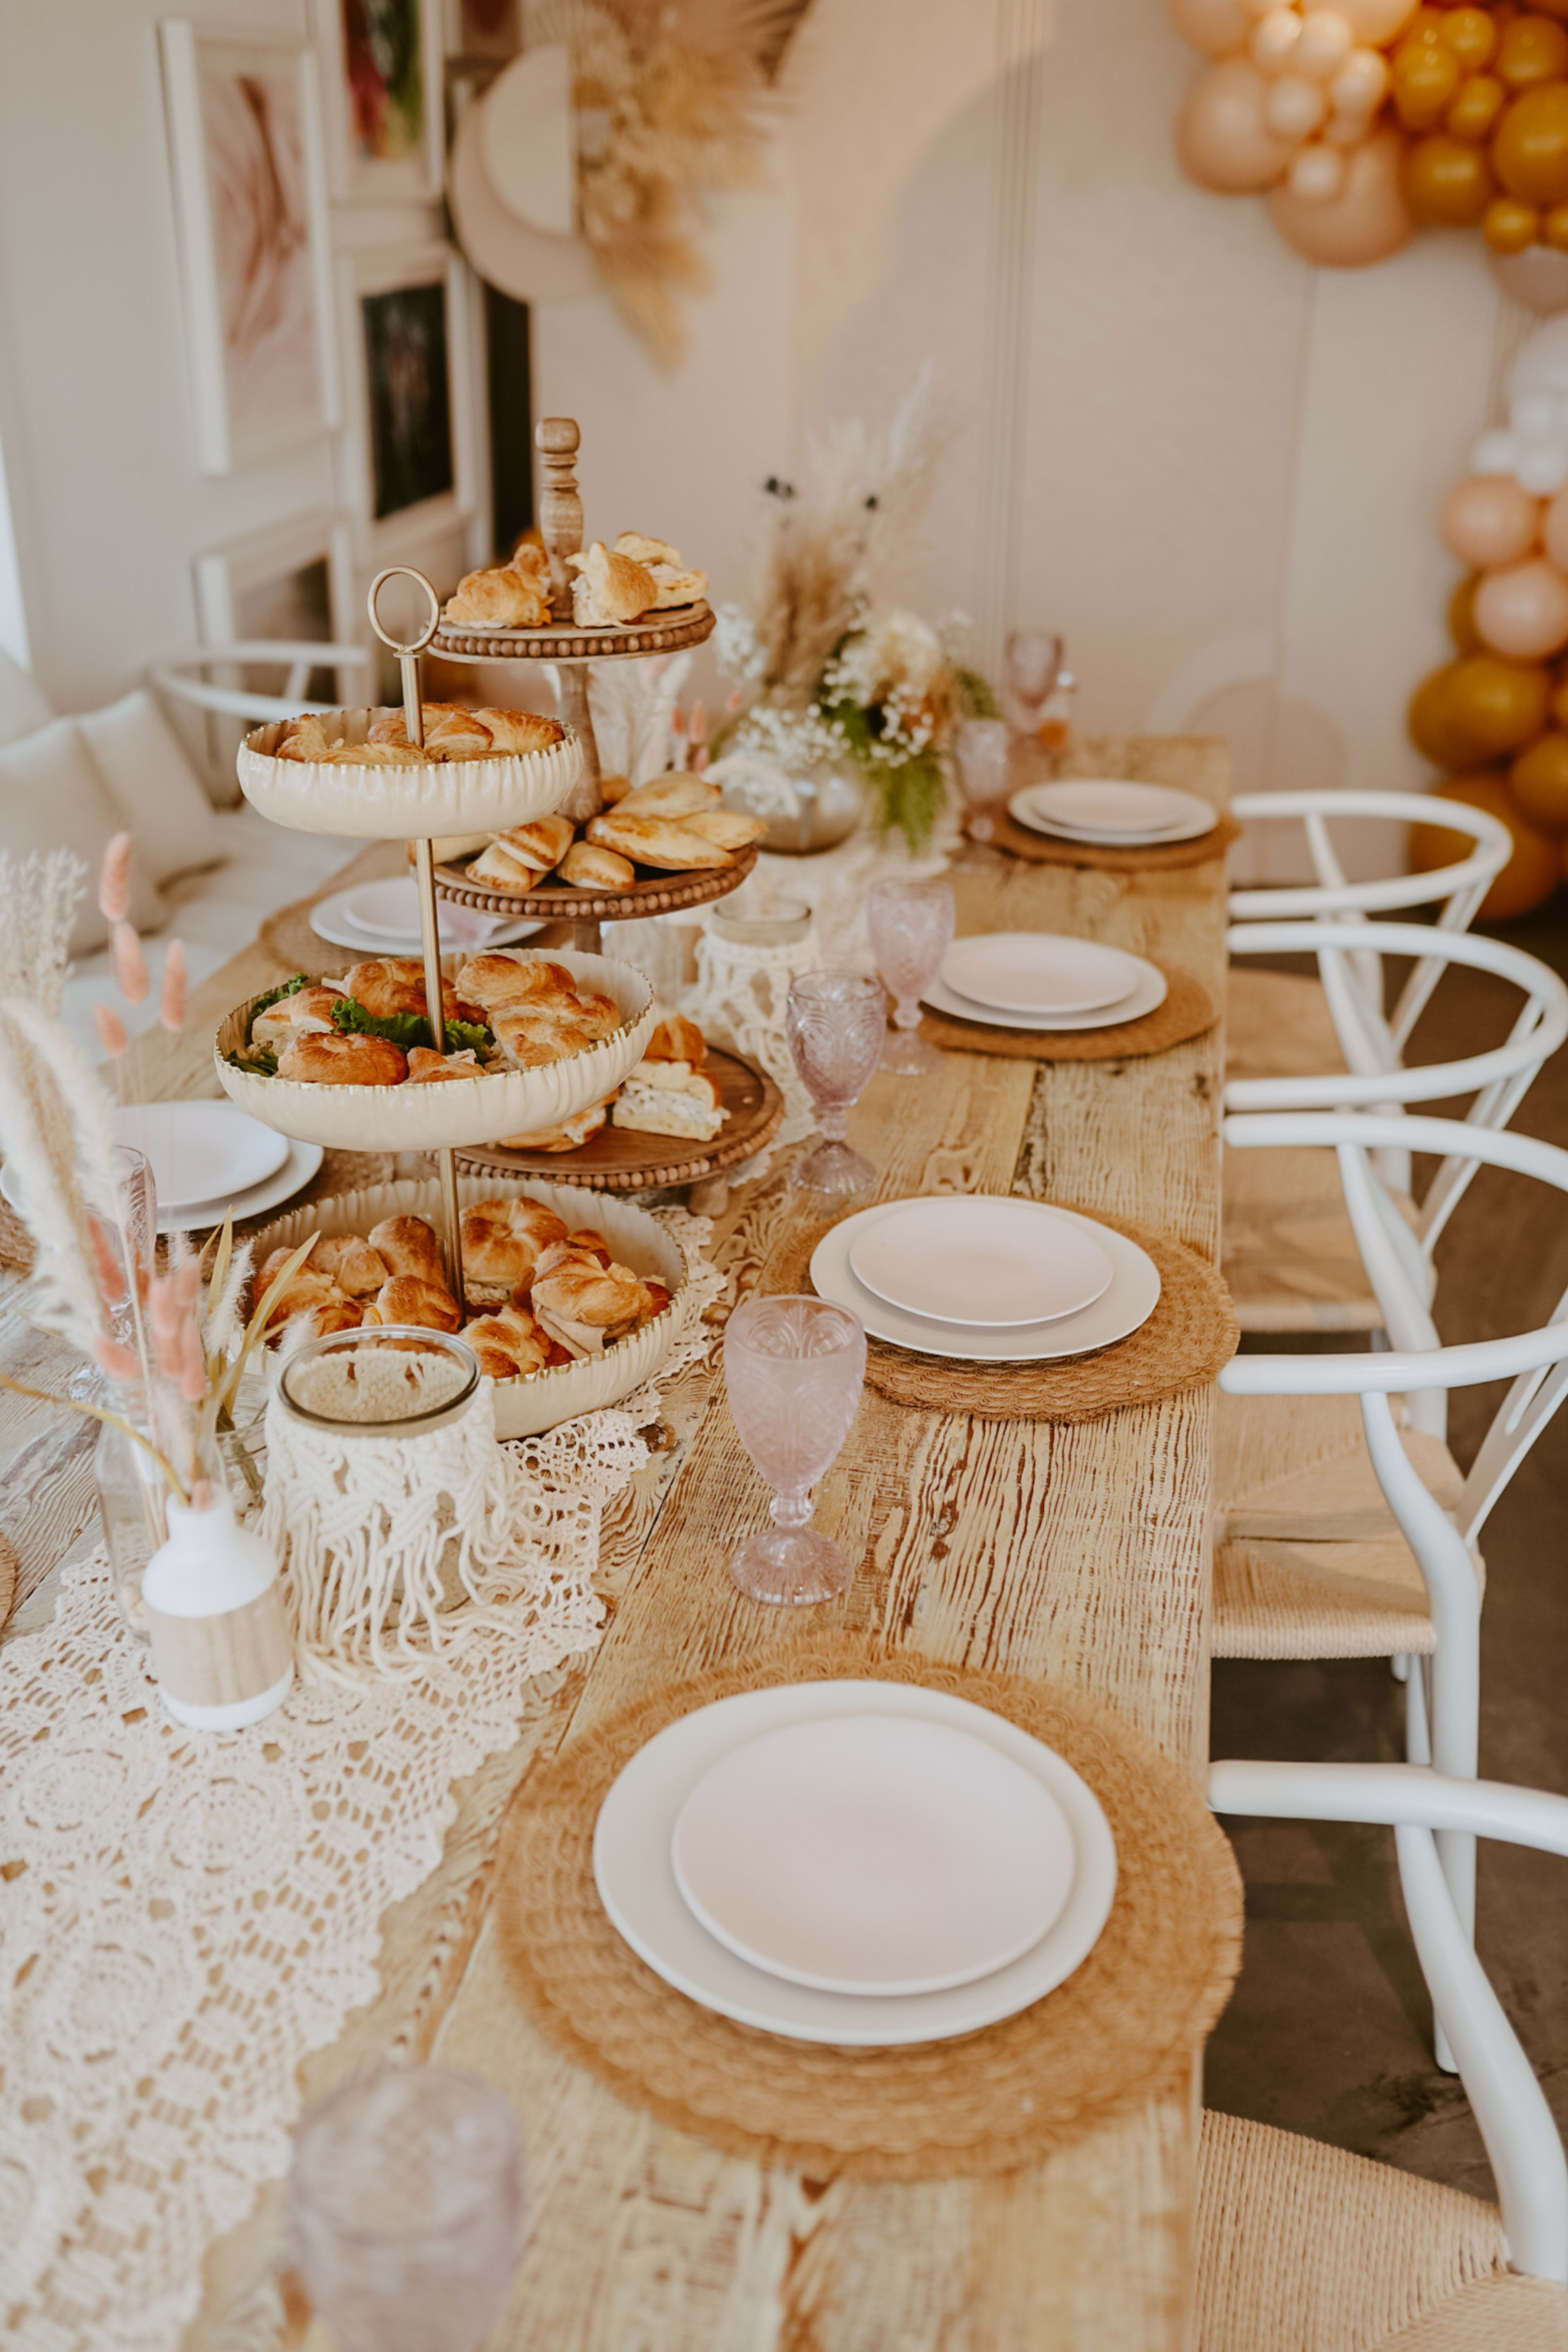 A table with pastries and white plates on it for a baby shower brunch.